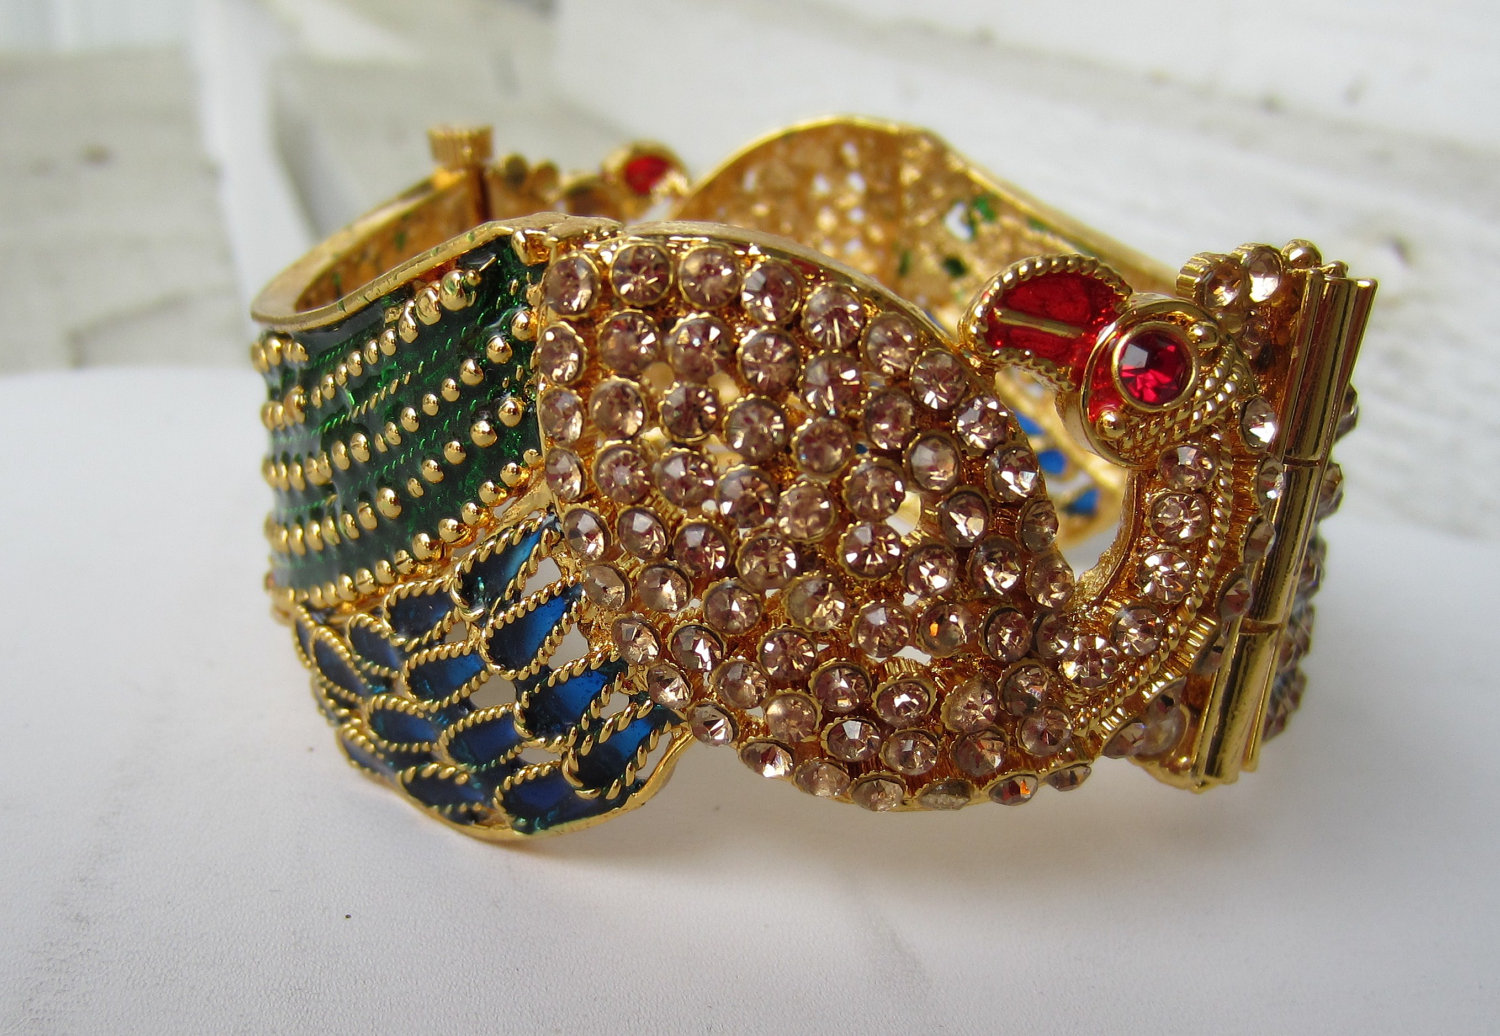 Truly Magnificent & Fashionable-Mughal jewelry